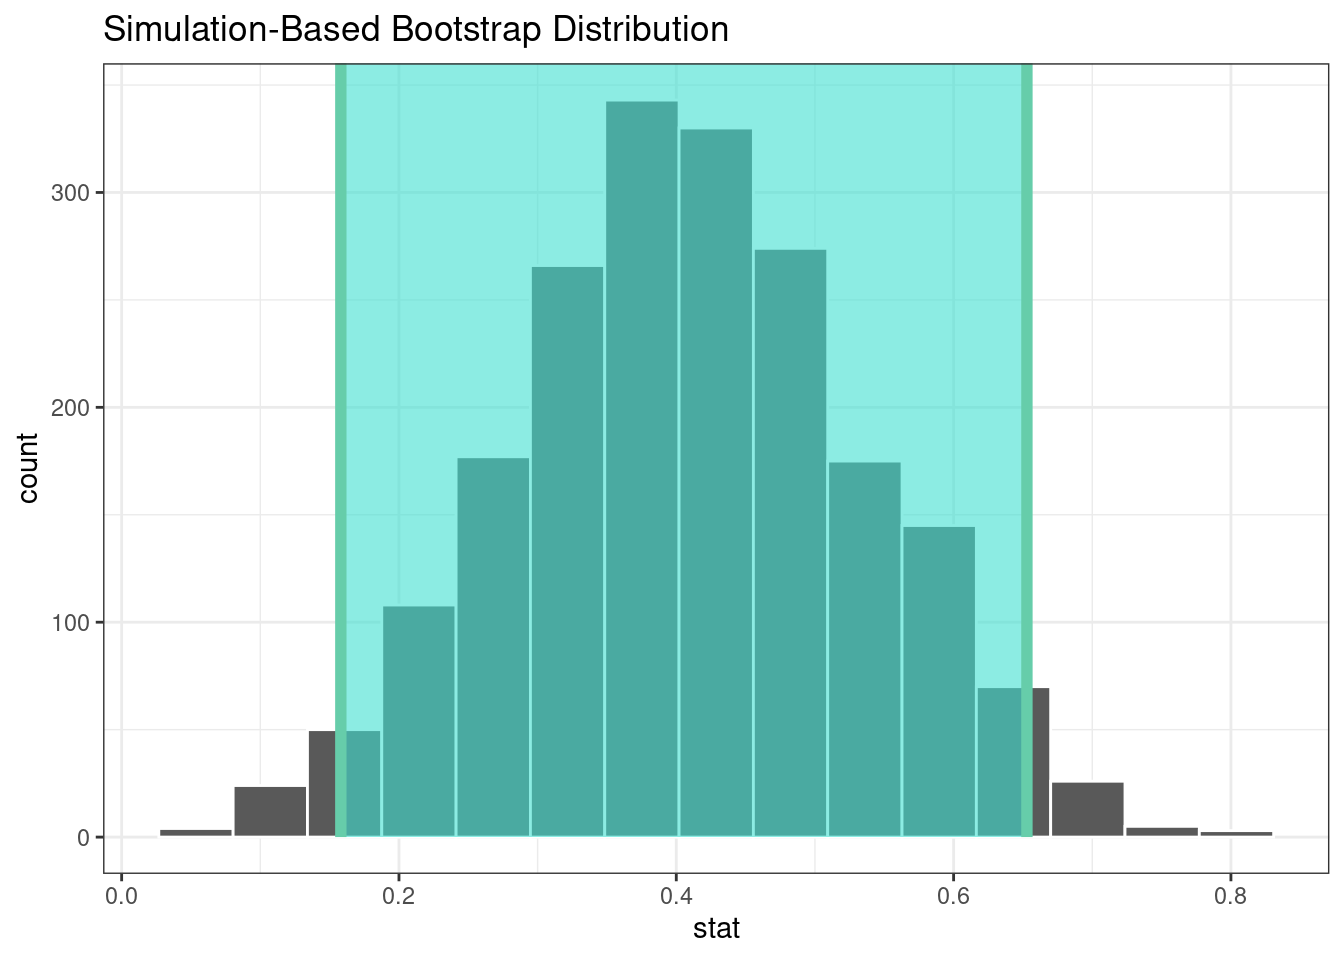 The bootstrap distribution of the difference in means. The highlighted region is the confidence interval, which does not include a value of zero.